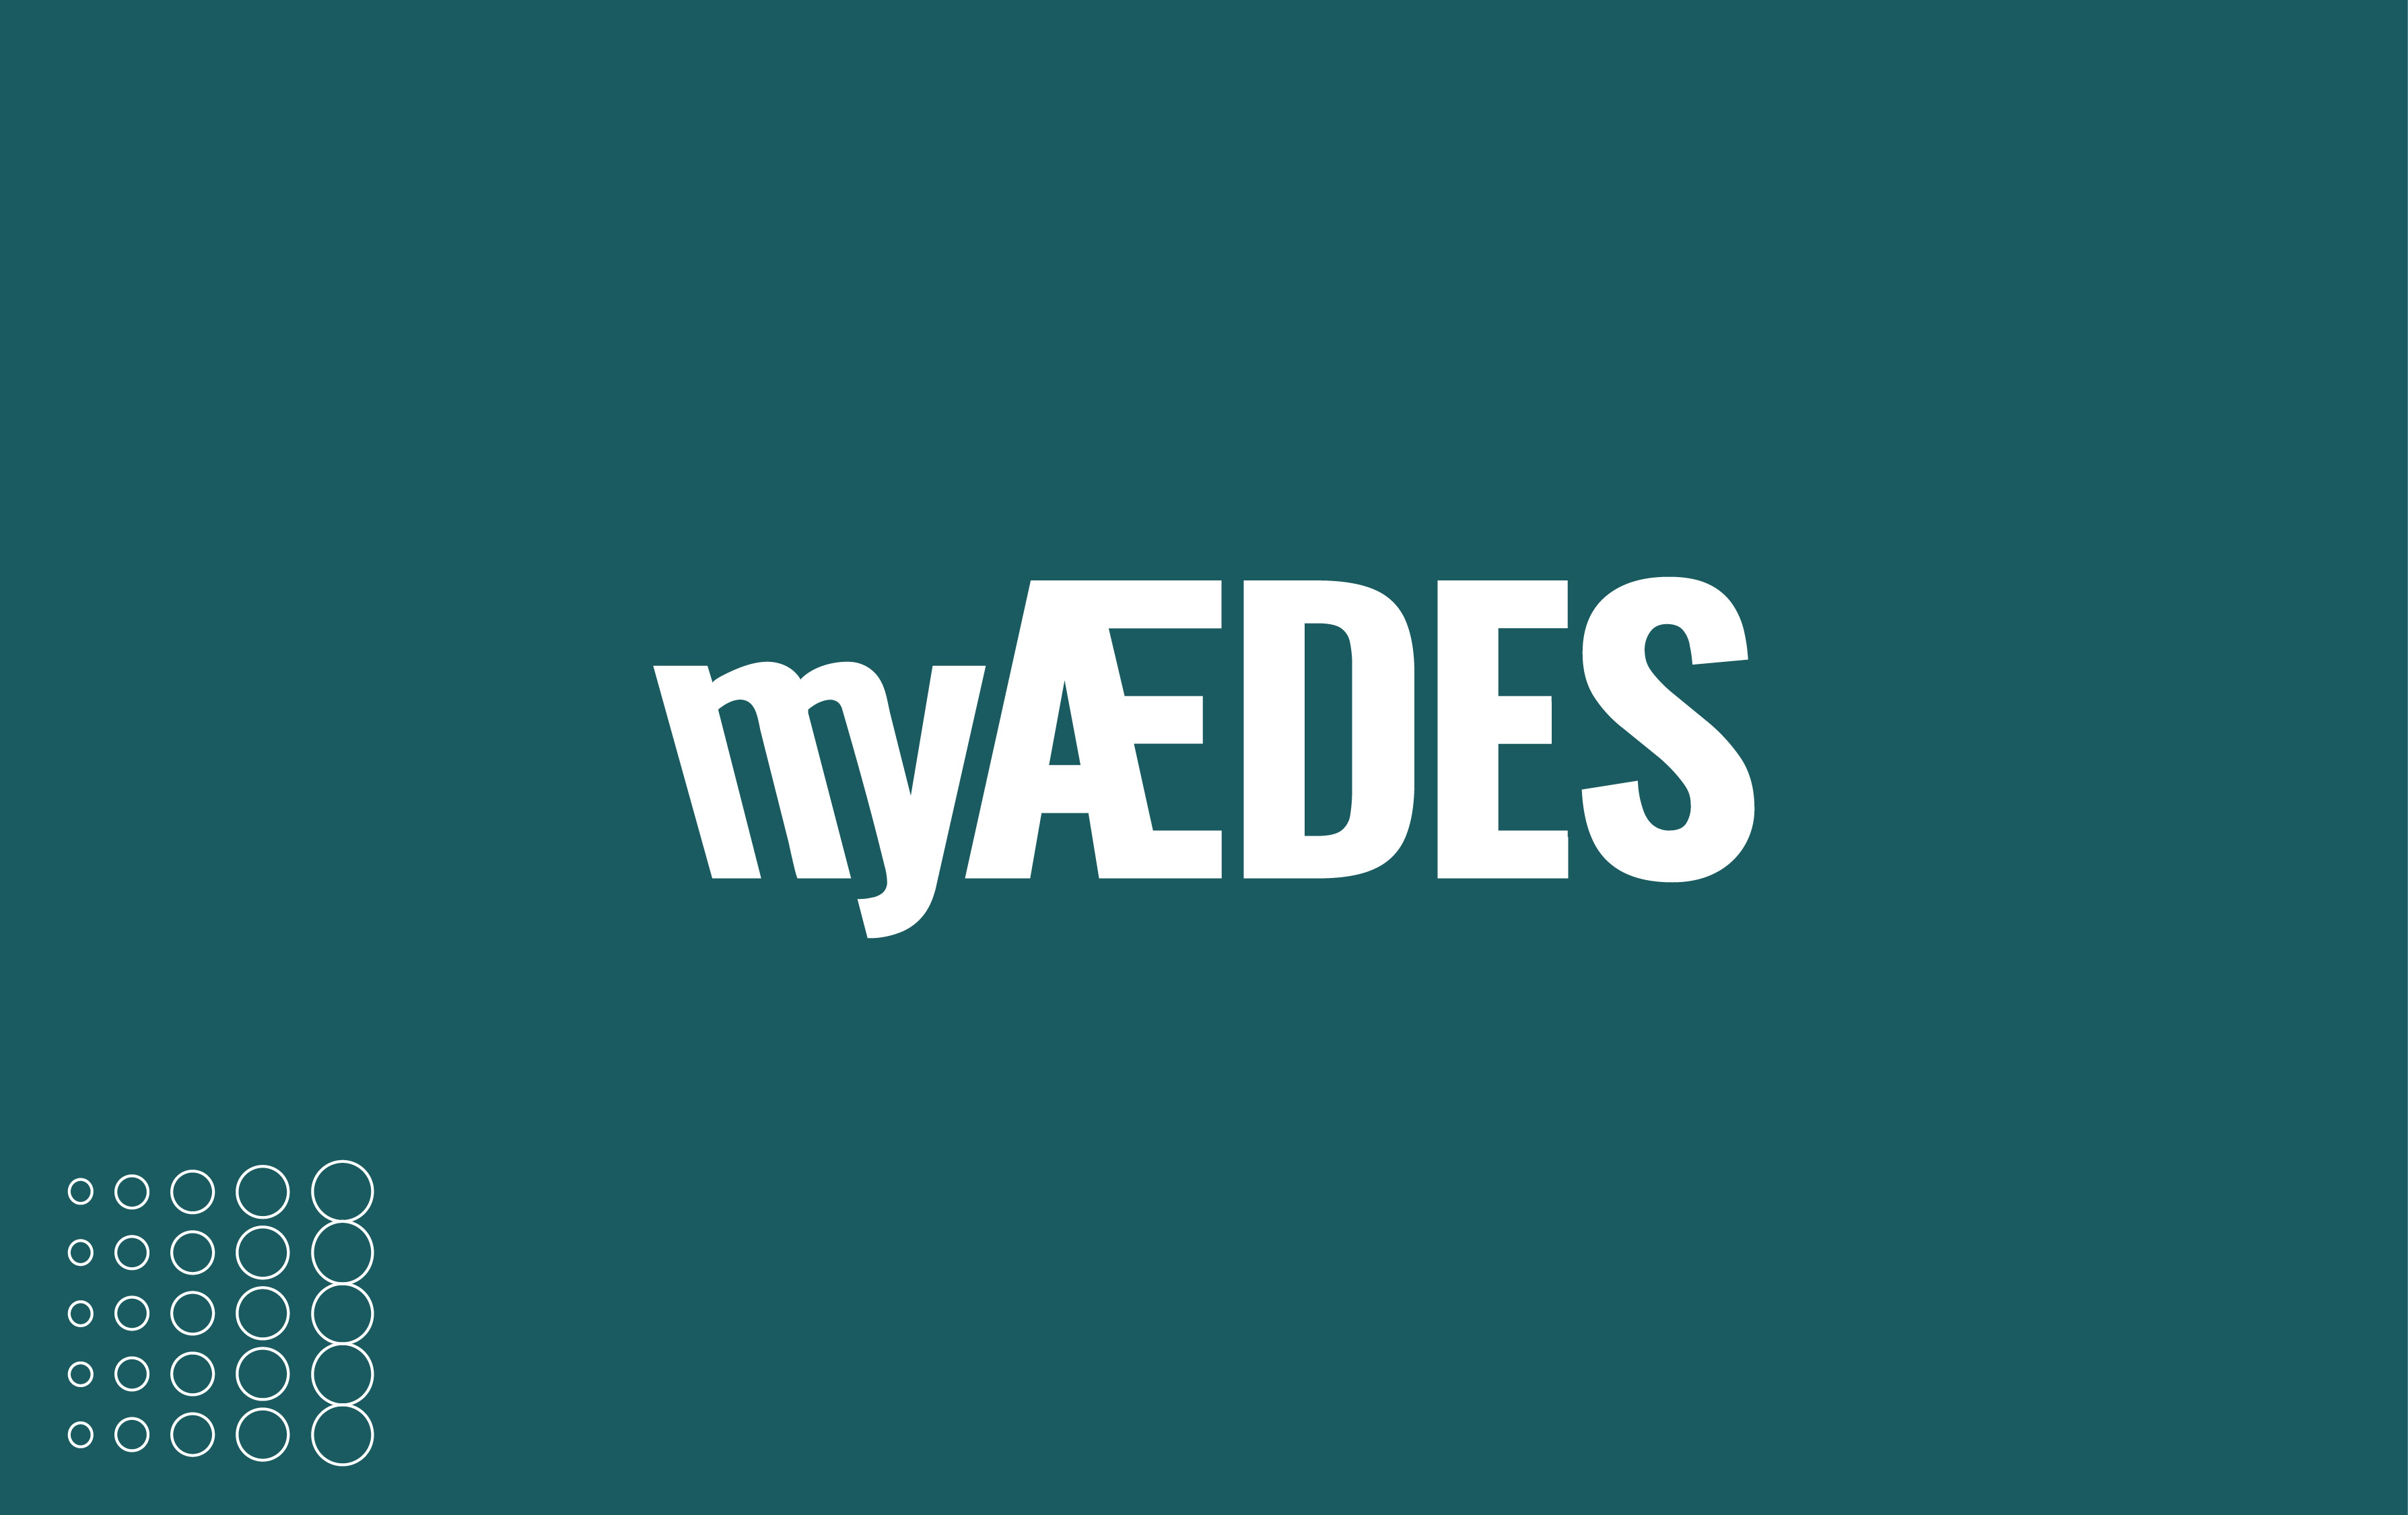 The PropTech startup myAEDES raises a €585K investment seed round